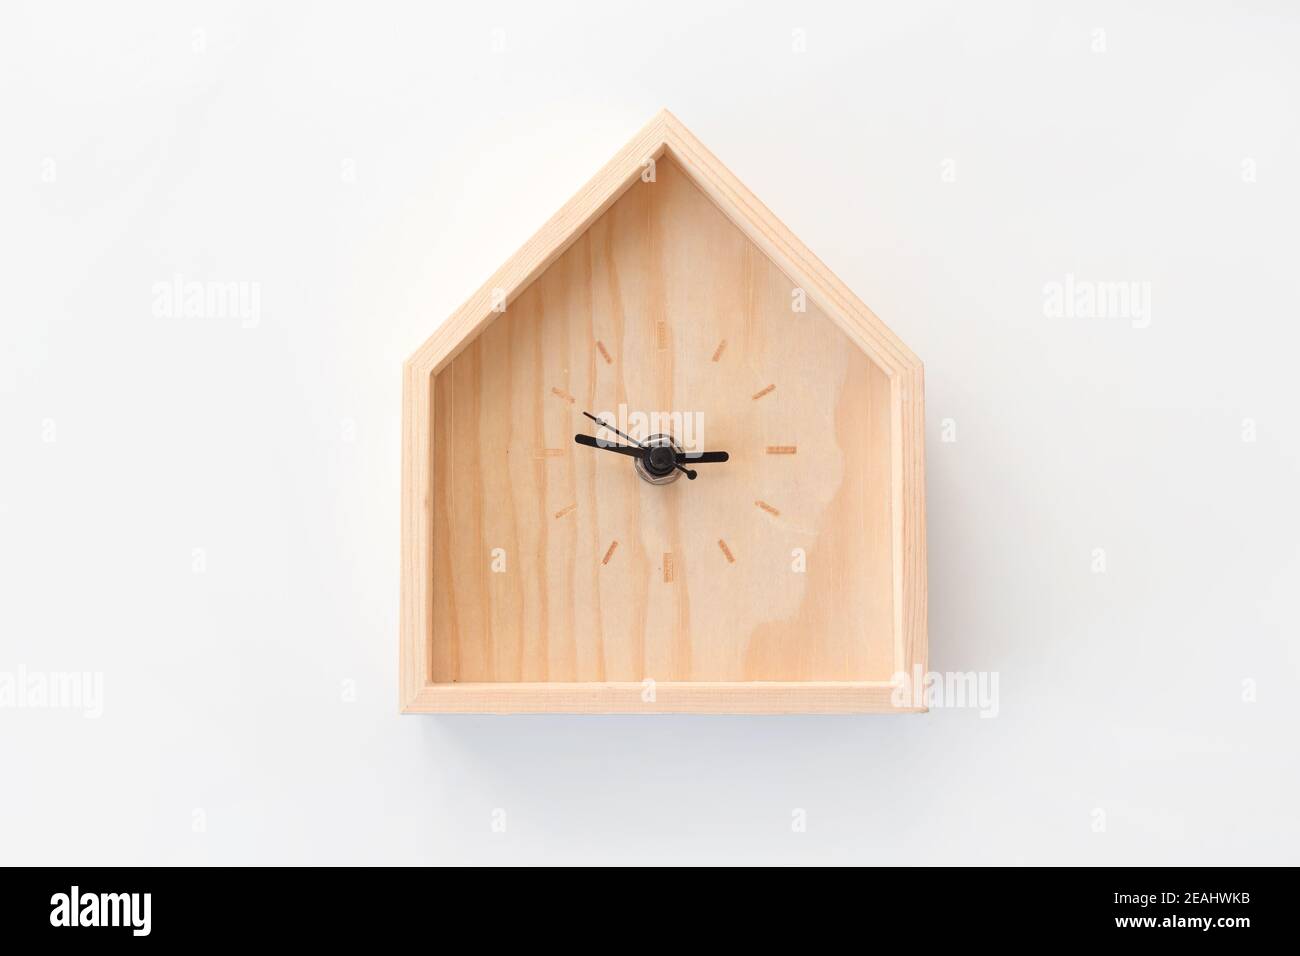 Wooden clock in the shape of house isolated on white background. Minimal concept. Flat lay. Top view. Stock Photo